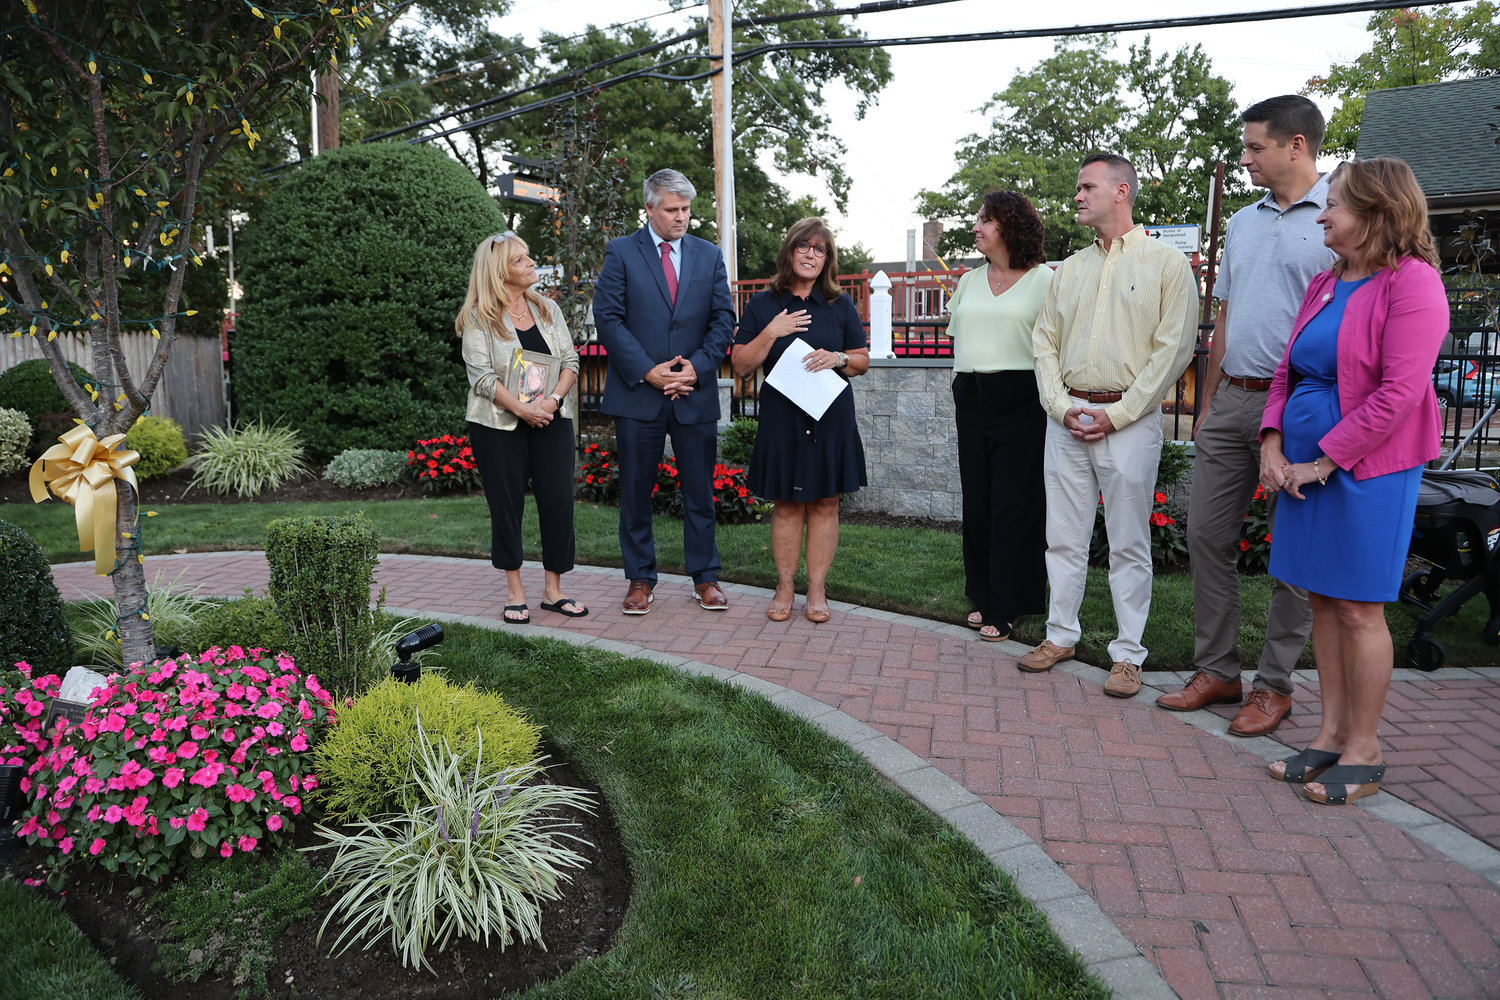 Marie Giallombardo, Mayor Keith Corbett, Carol Ruchalski, Trustees Patricia Fitzpatrick, Tim Sullivan, Carl Prizzi, and Assemblywoman Judy Griffin gathered to raise awareness of childhood cancer, as September in pediatric cancer awareness month.